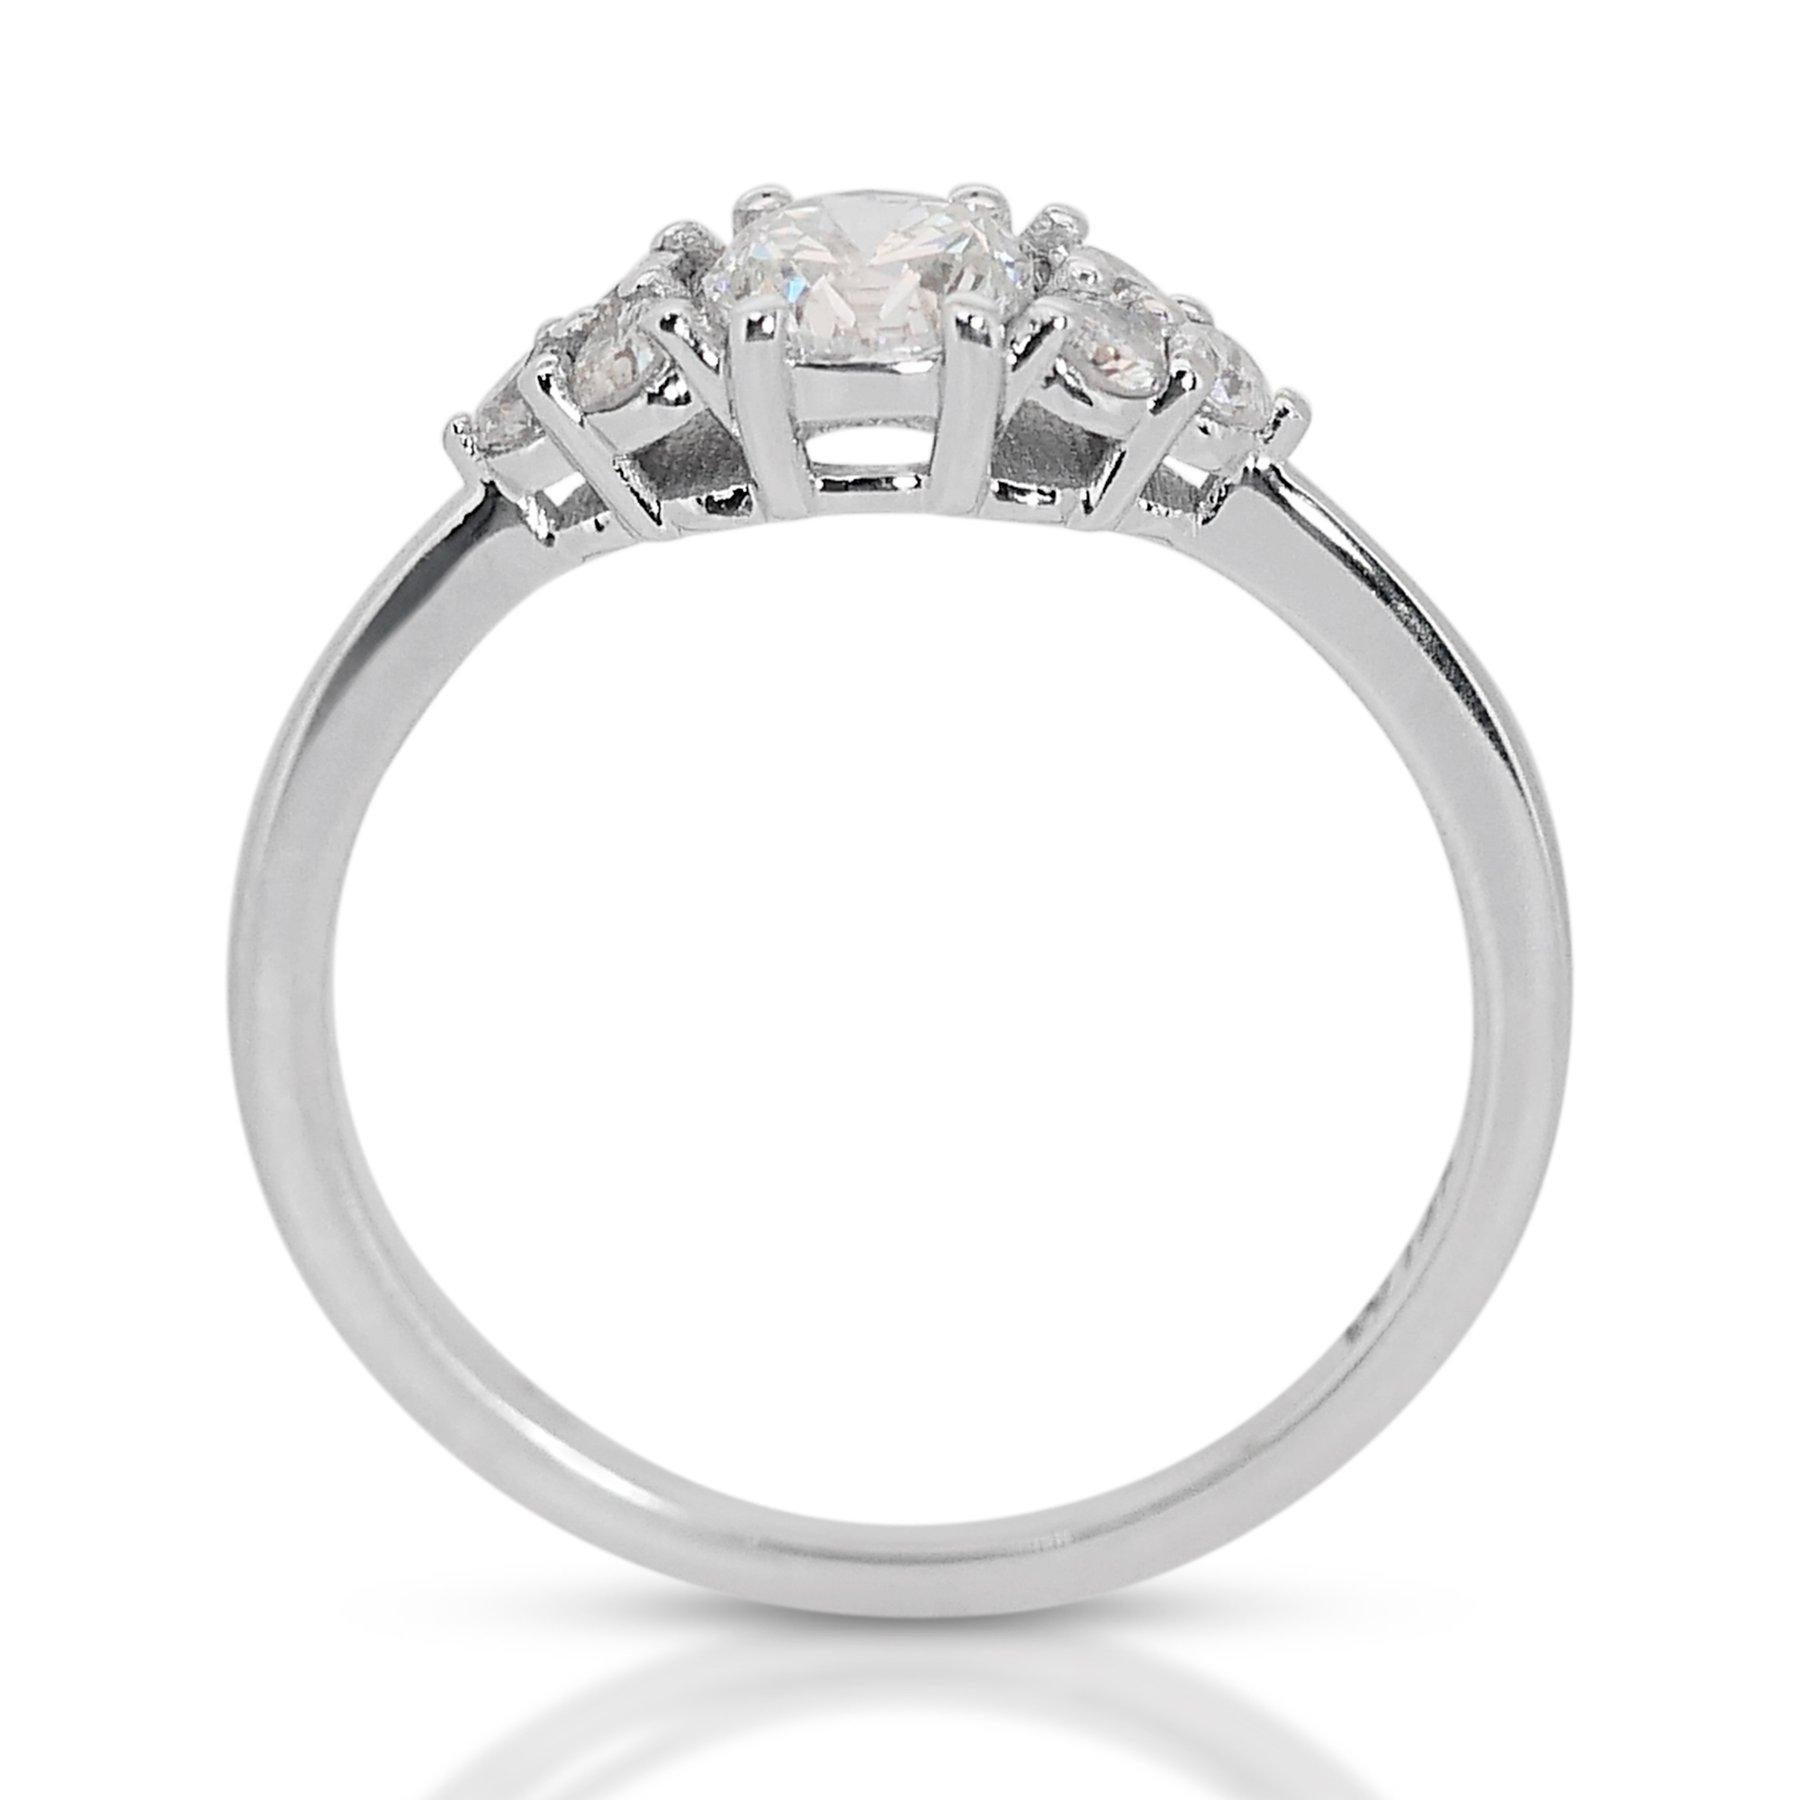 Captivating 1.25ct Diamonds 7-Stone Ring in 18k White Gold - GIA Certified For Sale 2